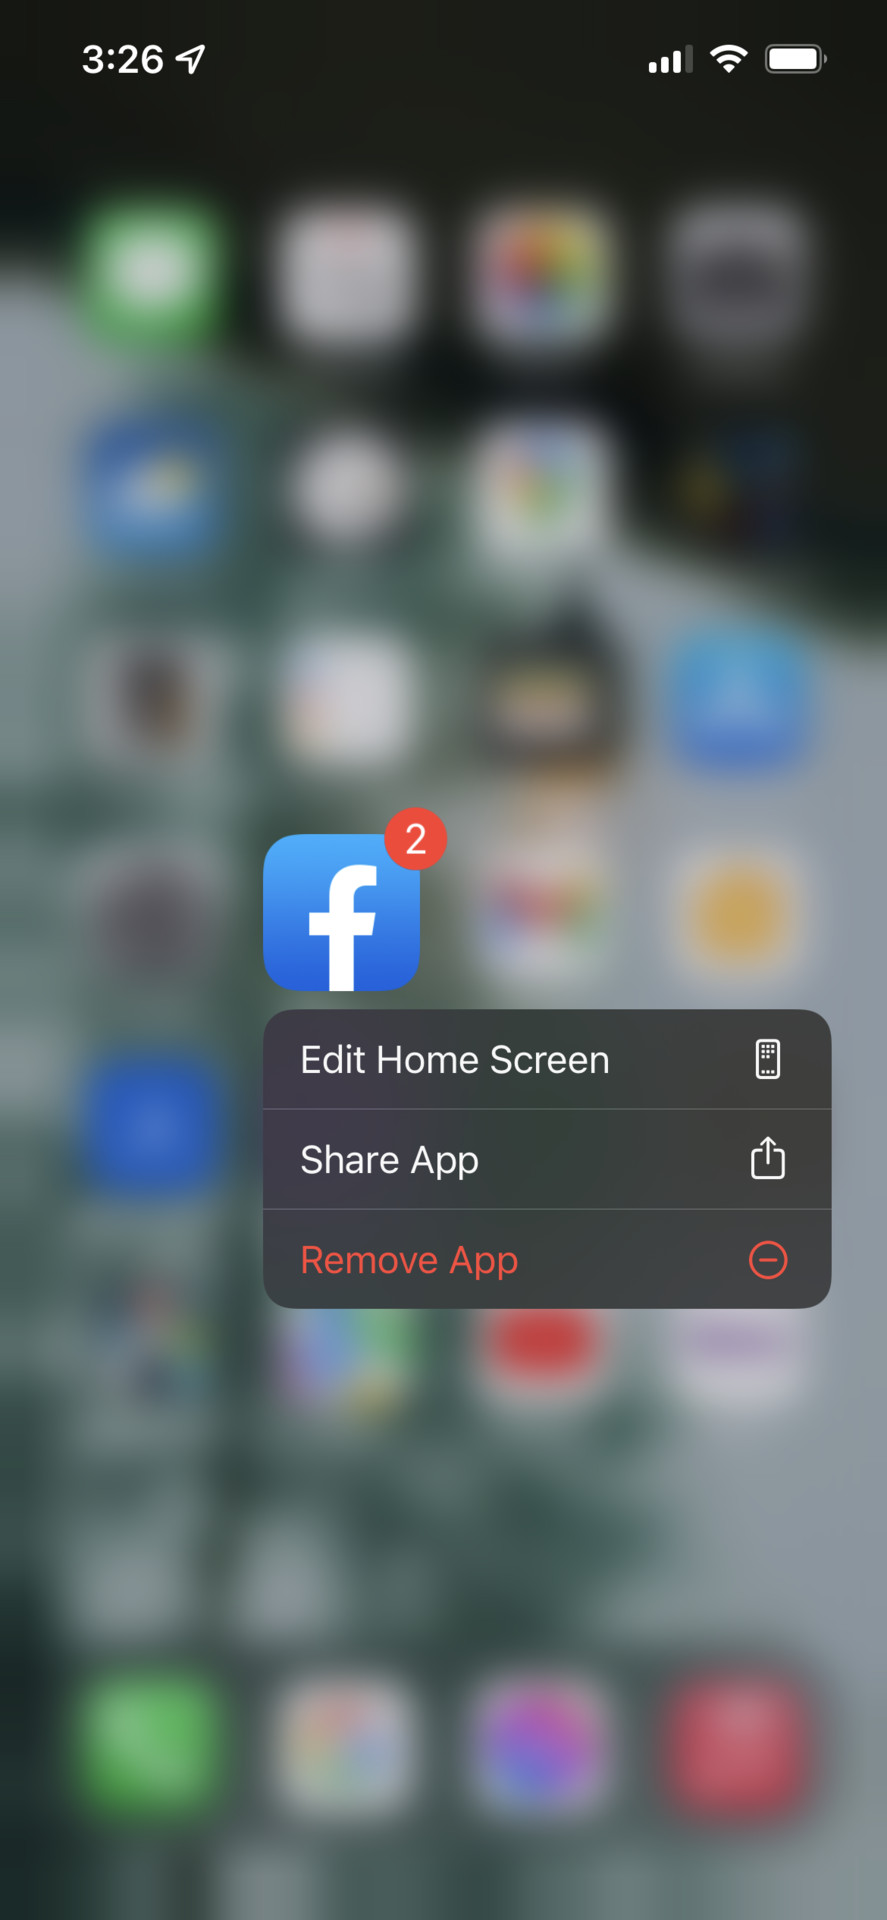 Icon options in iOS 15